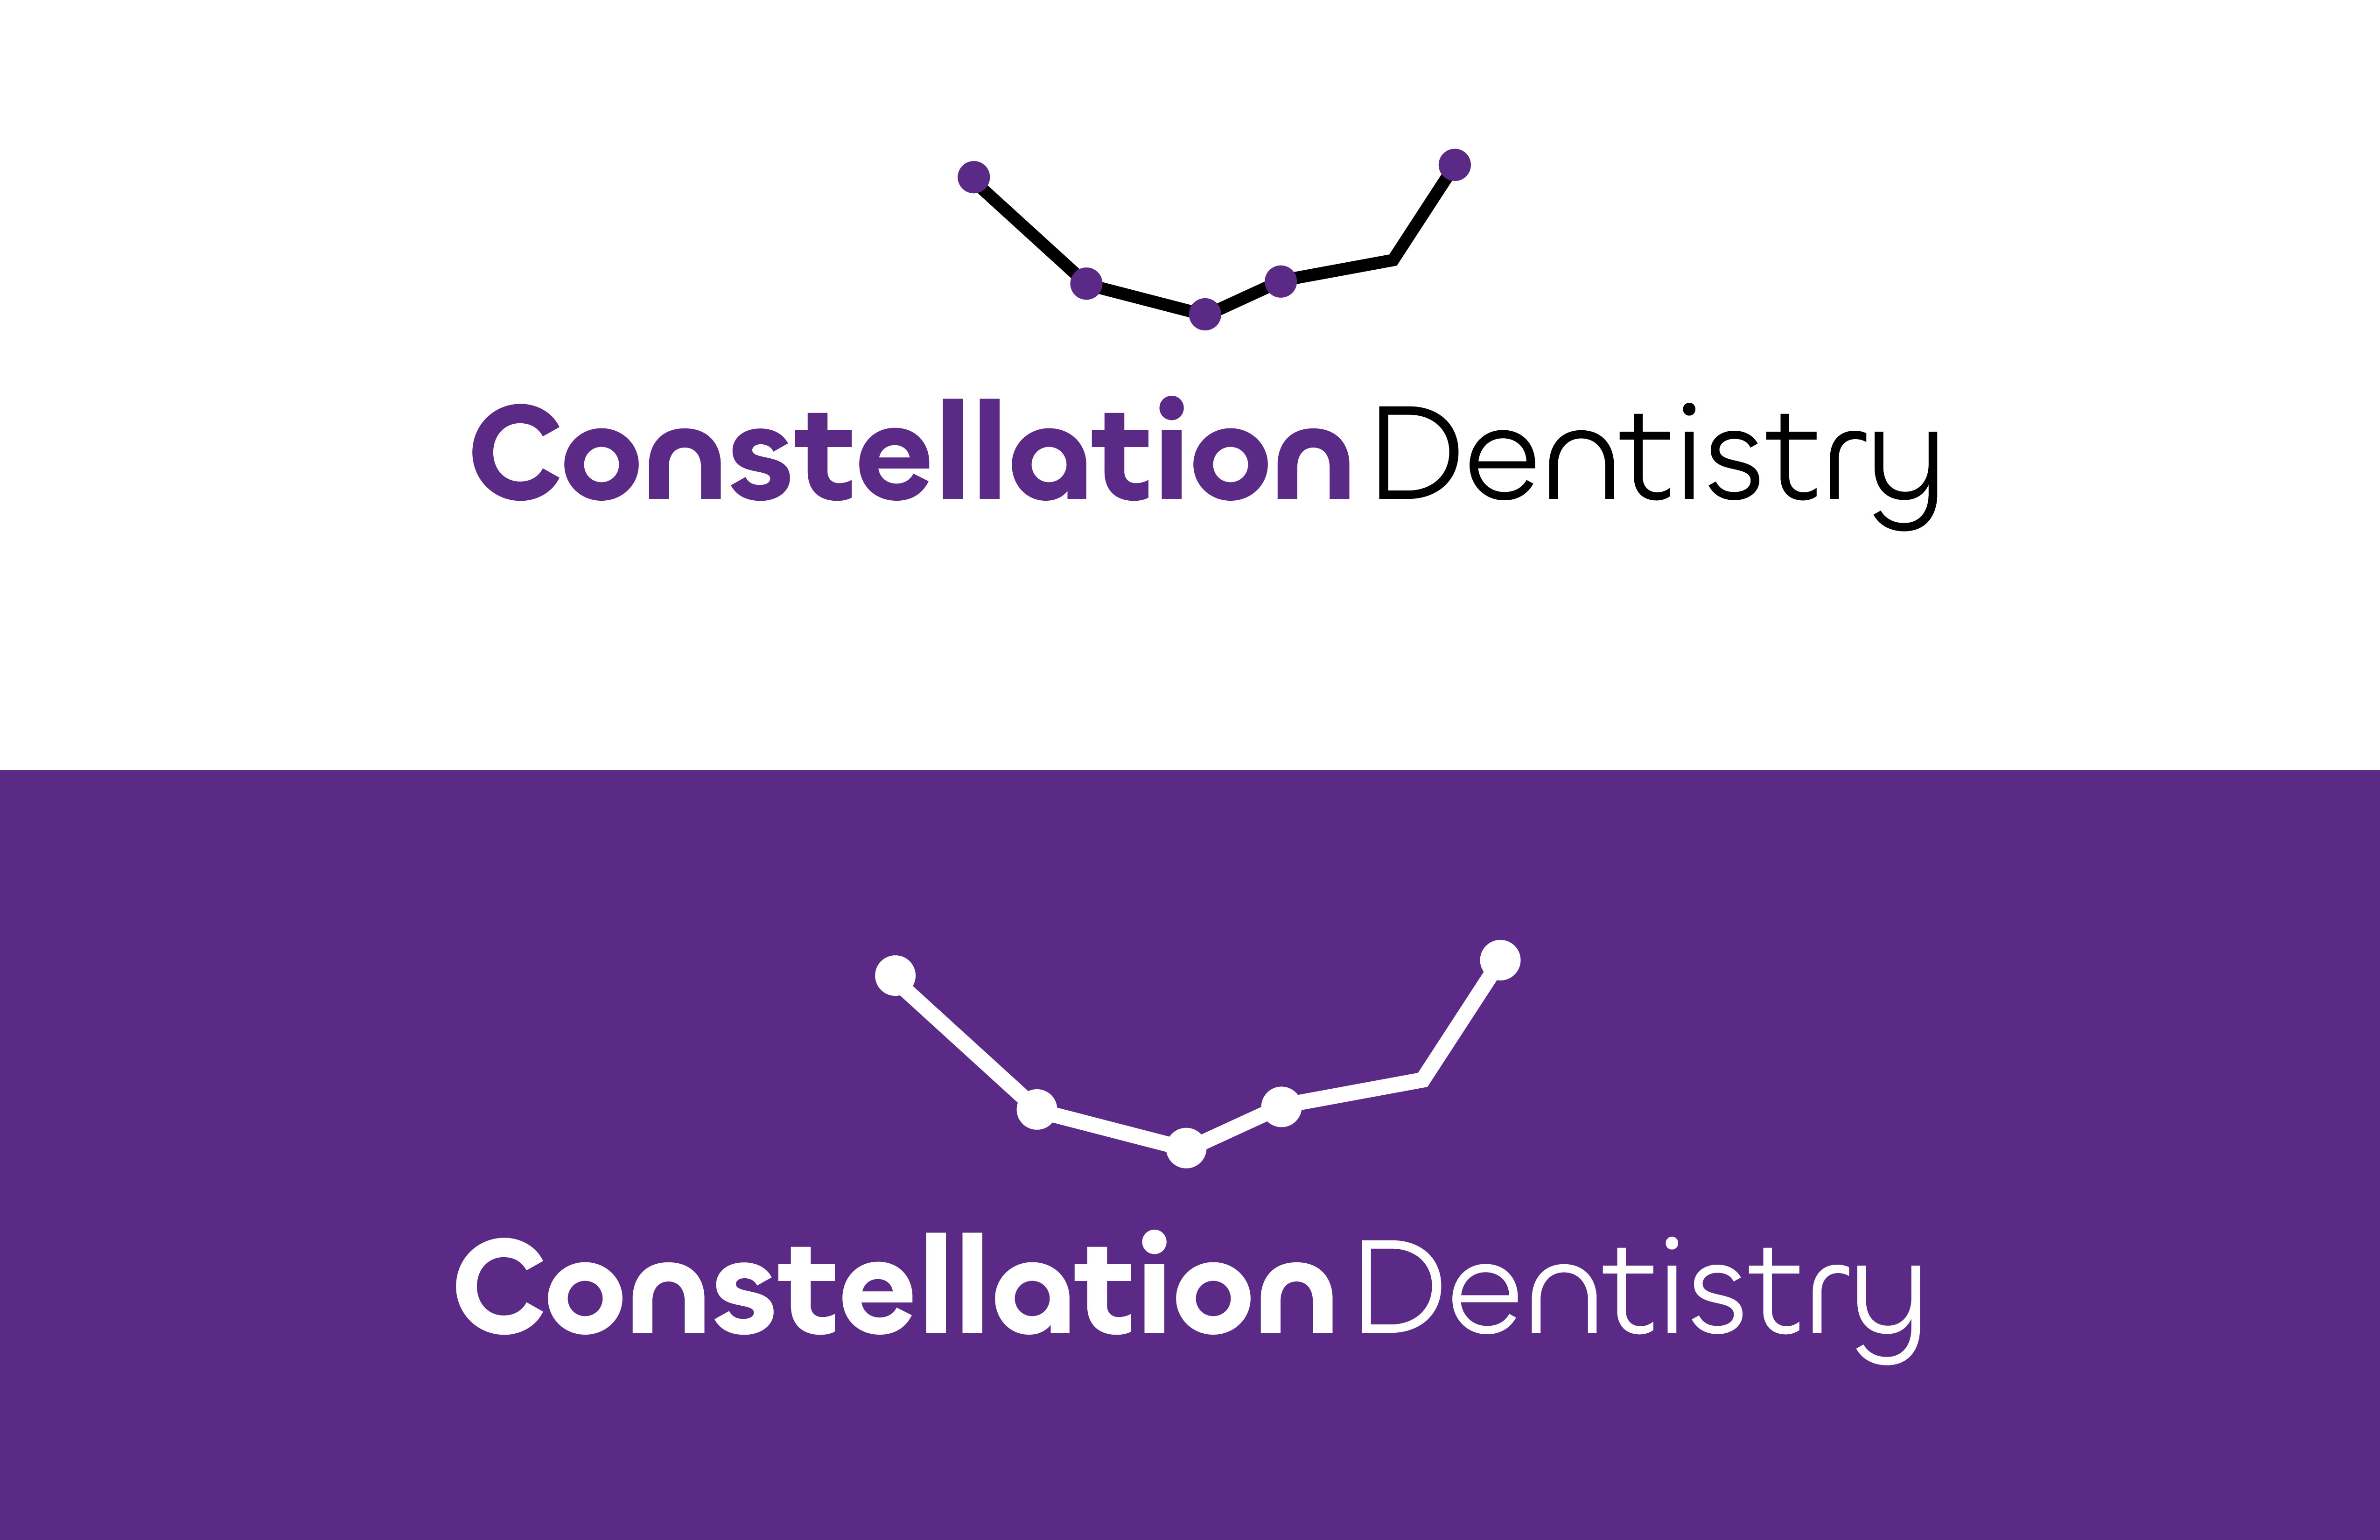 2 Horizontal Constellation Dentistry, 1 in color and 1 in white